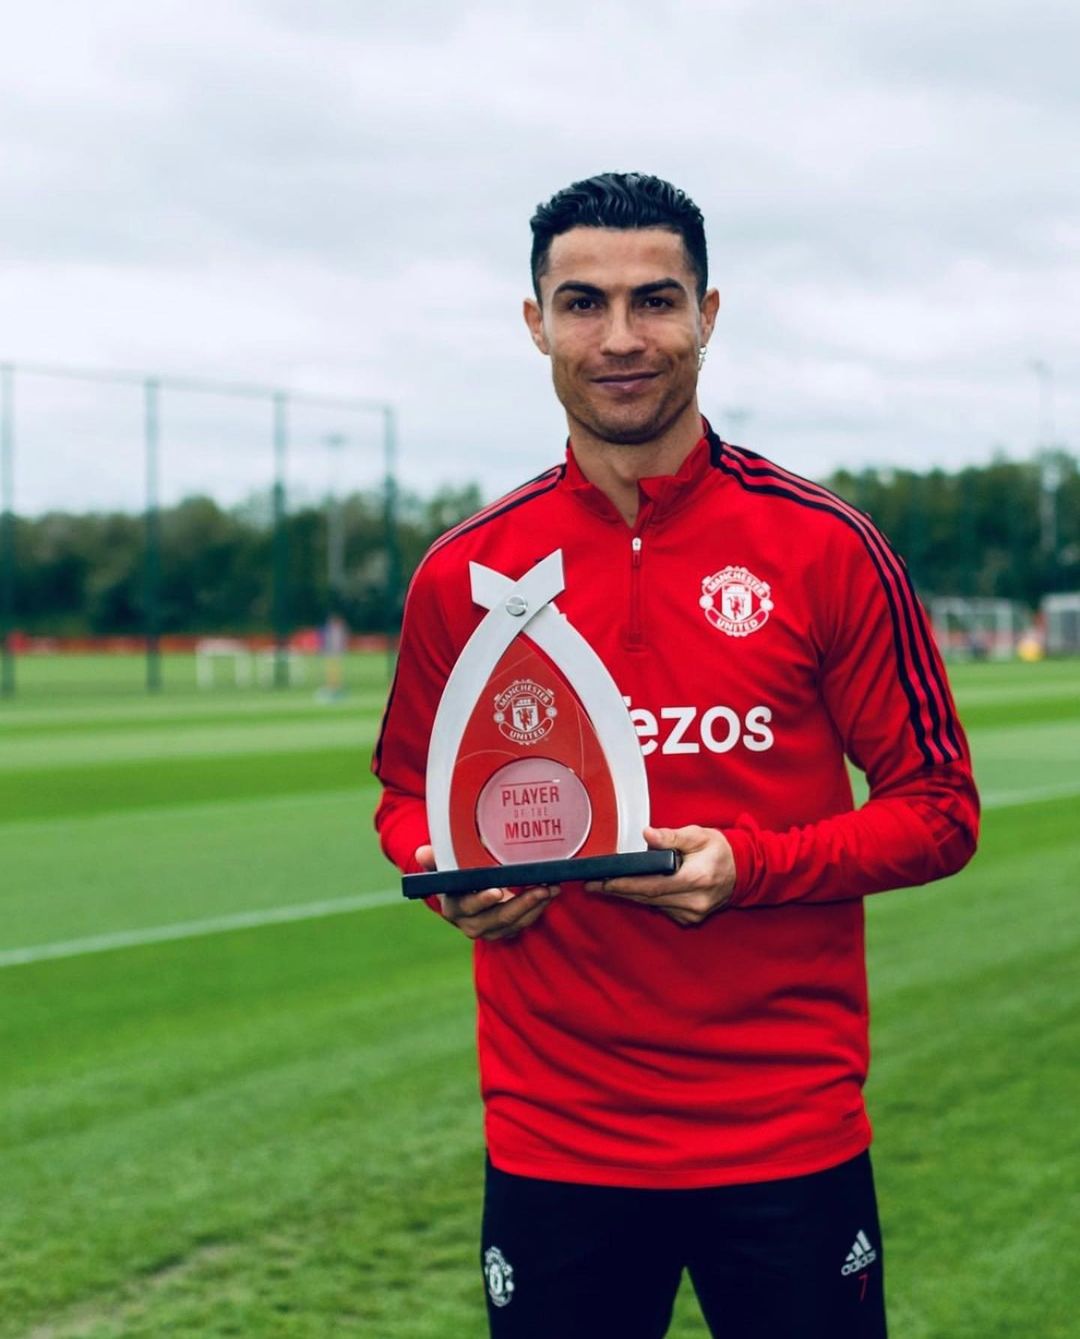 Thanks to all the supporters who voted for me and to all my teammates who helped me achieve this award once again. I’m always proud to represent this amazing club and it’s very gratifying to be acknowledged by the Man. United community.????????????????